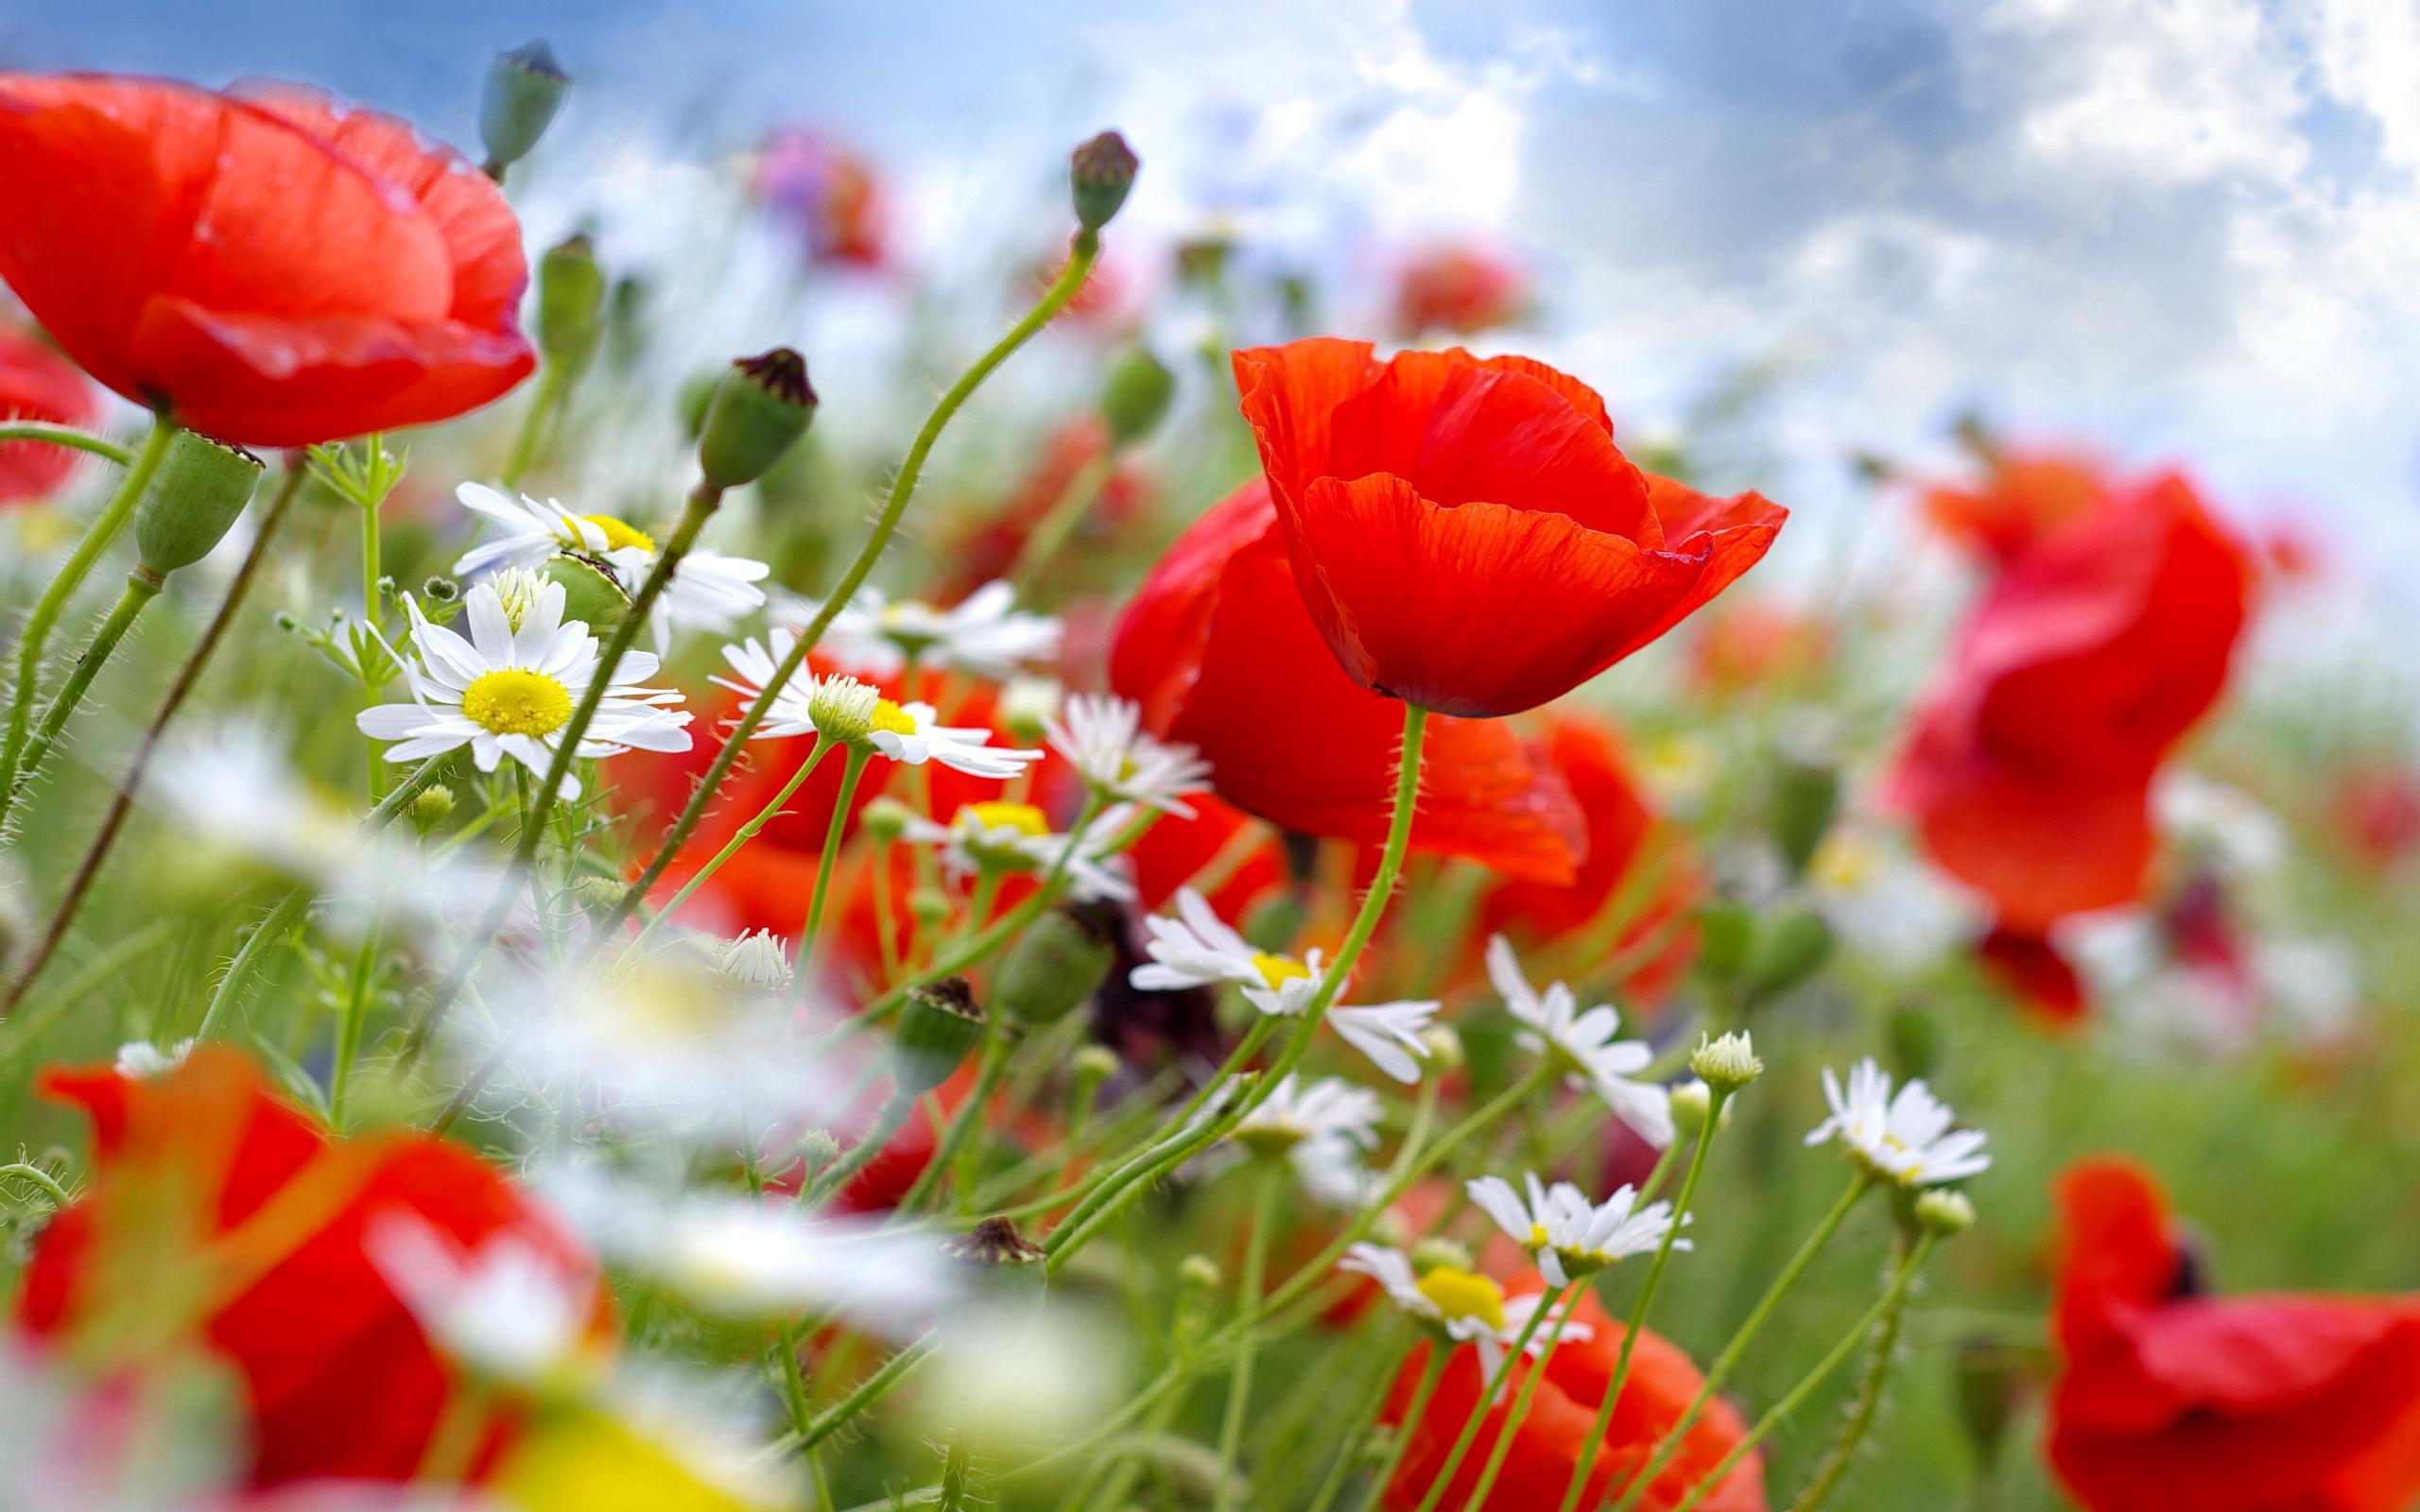 Floral Field - Daisies With Poppies - HD Wallpaper 